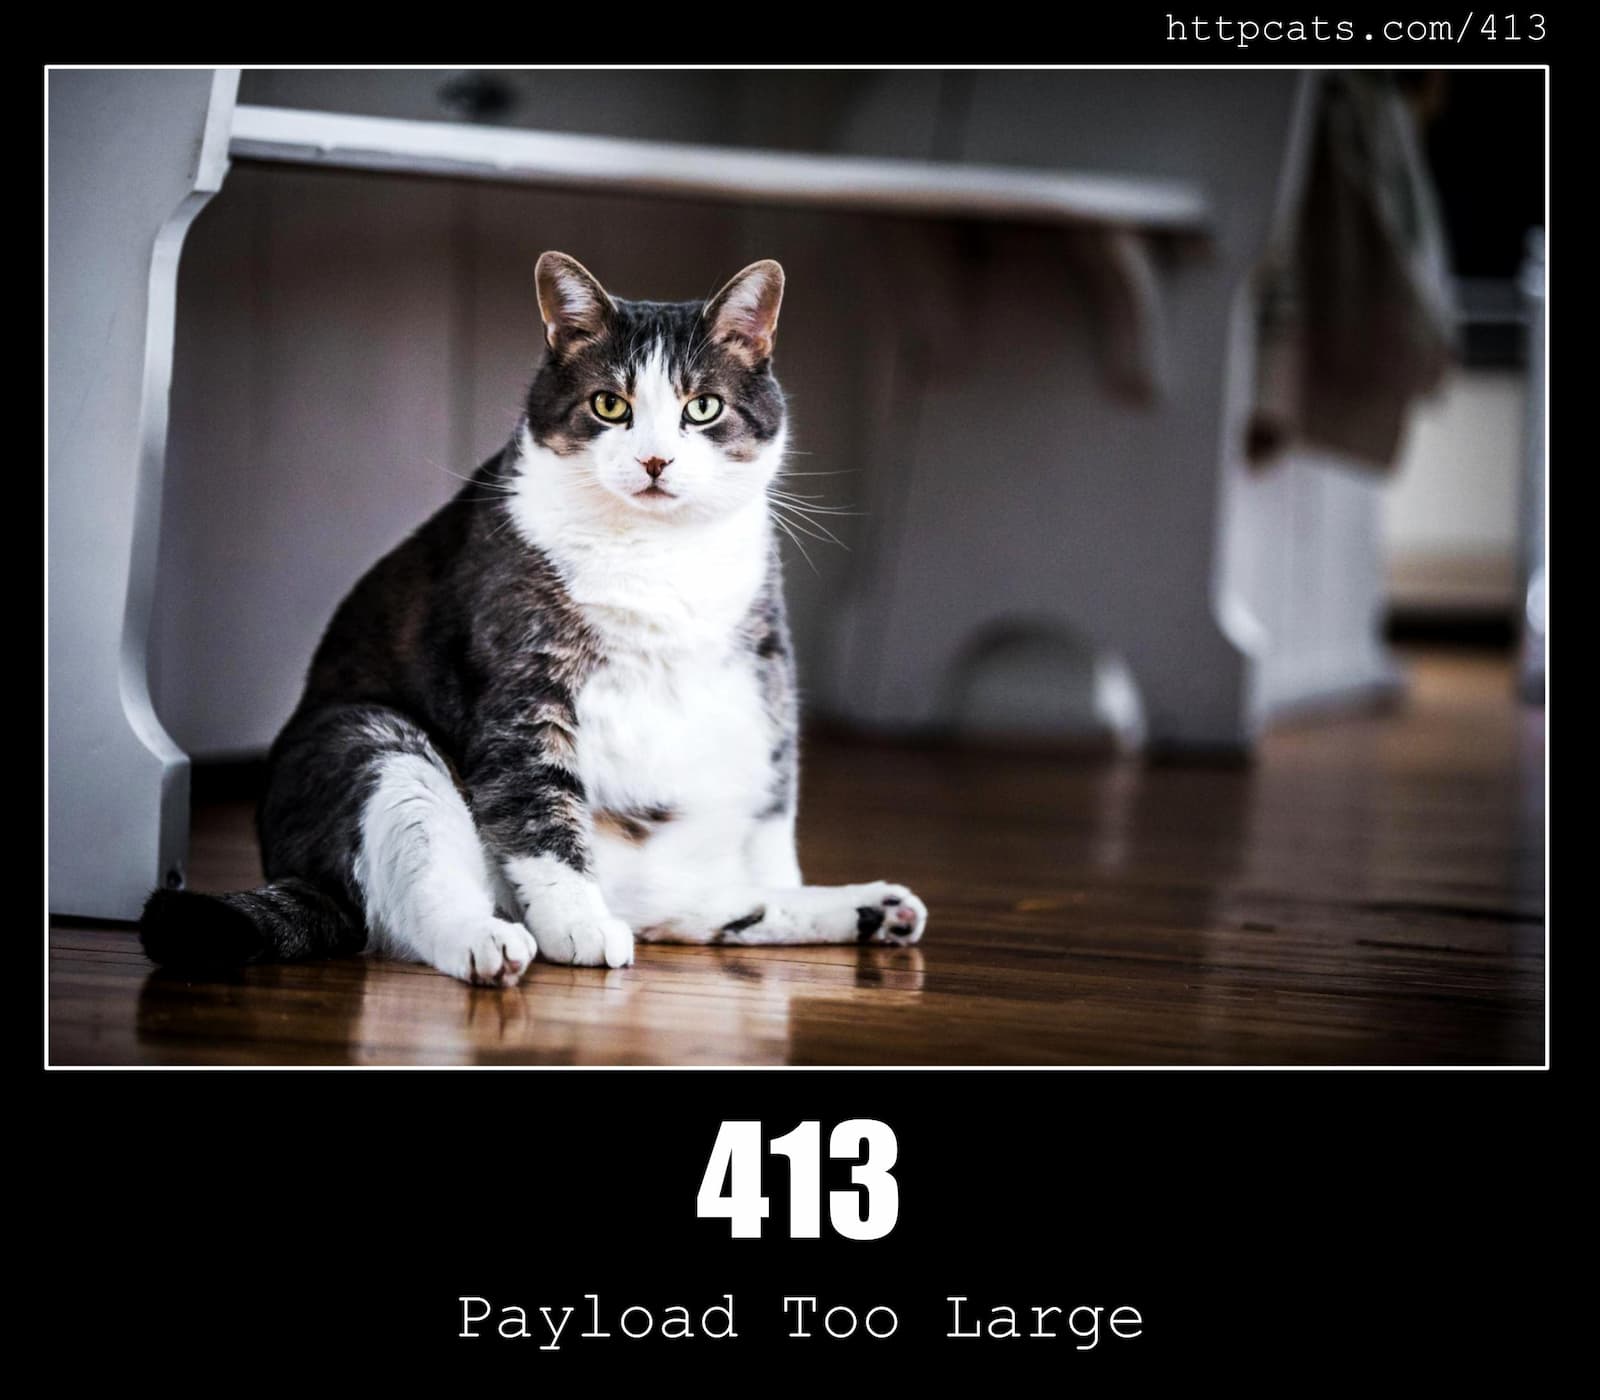 HTTP Status Code 413 Payload Too Large & Cats